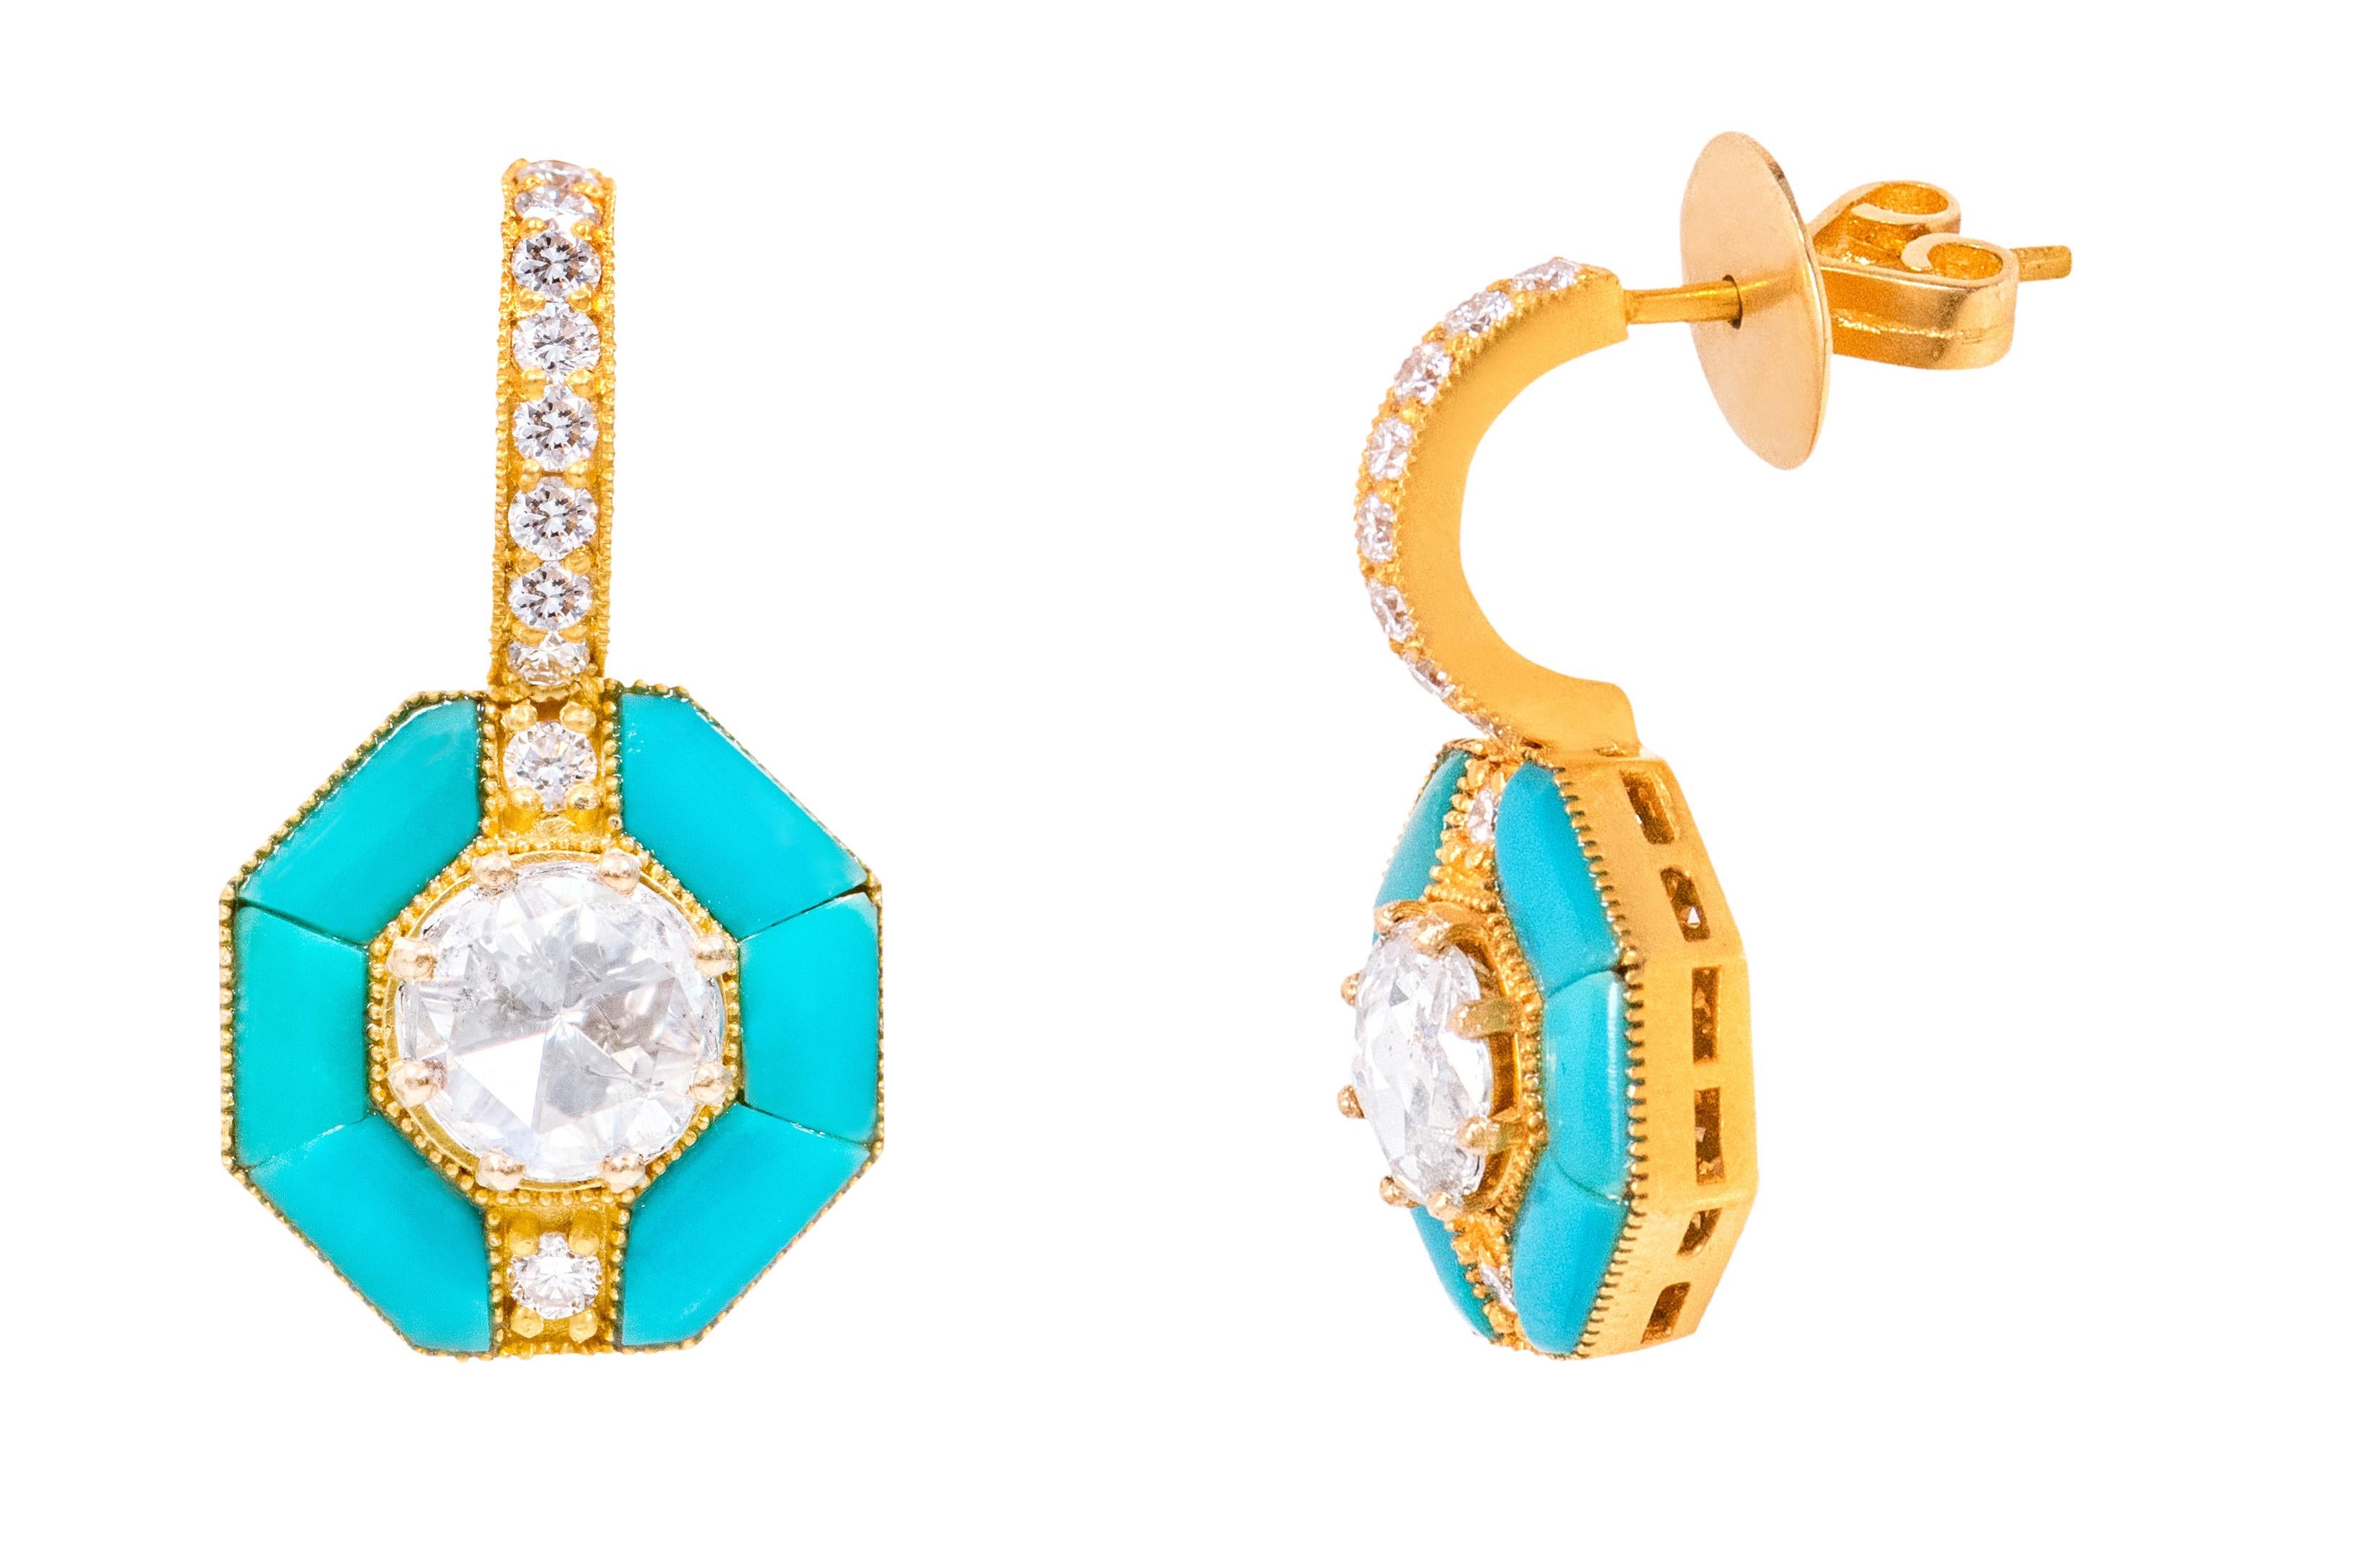 18 Karat Yellow Gold 3.55 Carat Solitaire Diamond and Turquoise Drop Earrings

This ingenious turquoise and rose cut diamond earring is sensational. The solitaire rose cut round diamond in the center is held tightly in the 8-prong setting and is